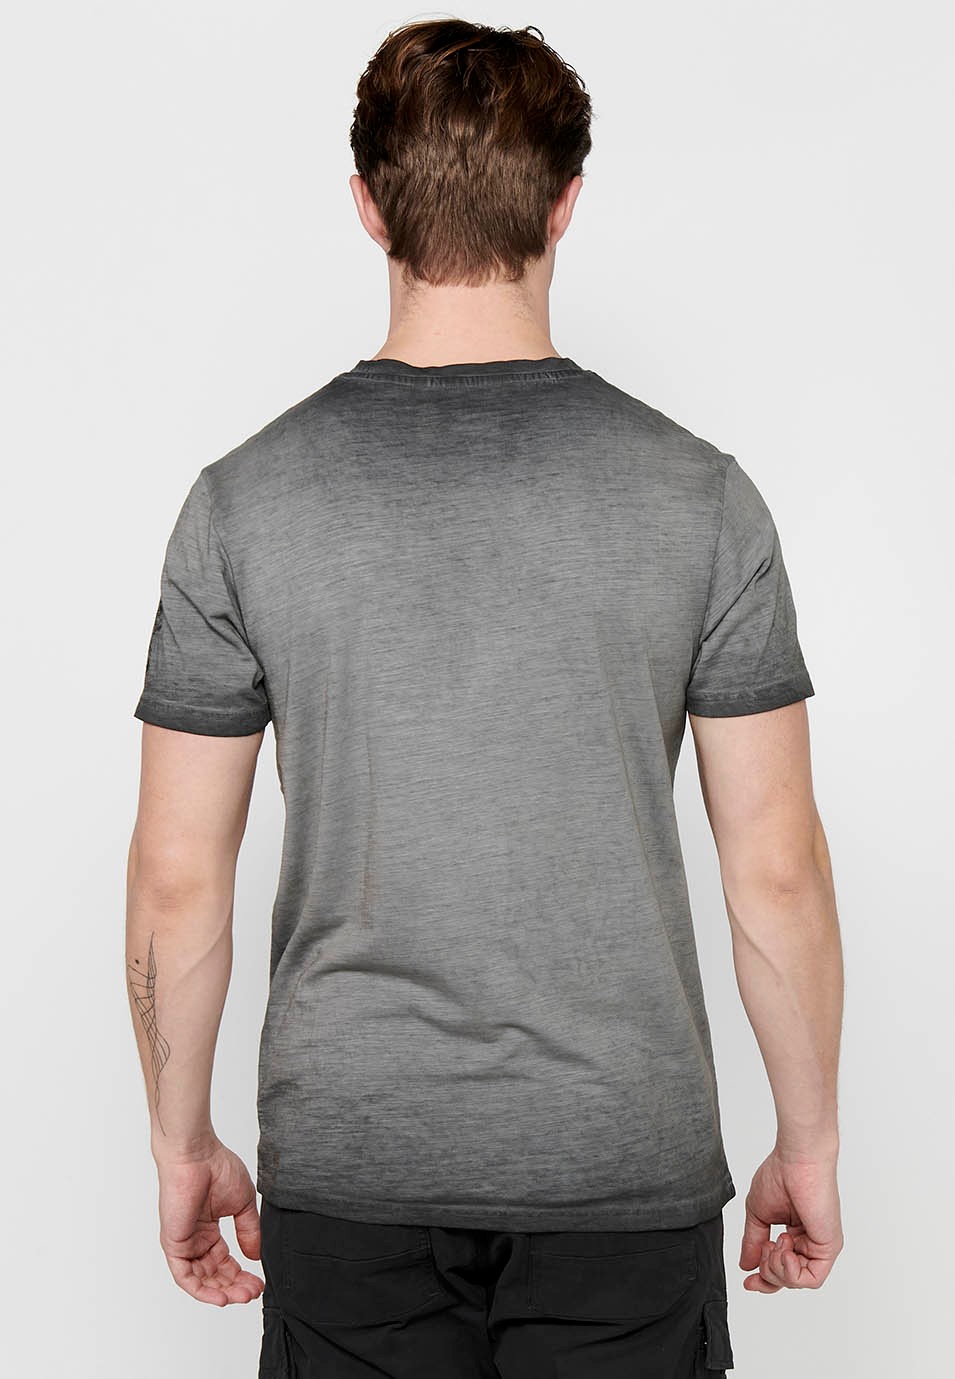 Short-sleeved Cotton T-shirt with Round Neck and Gray Front Print for Men 6